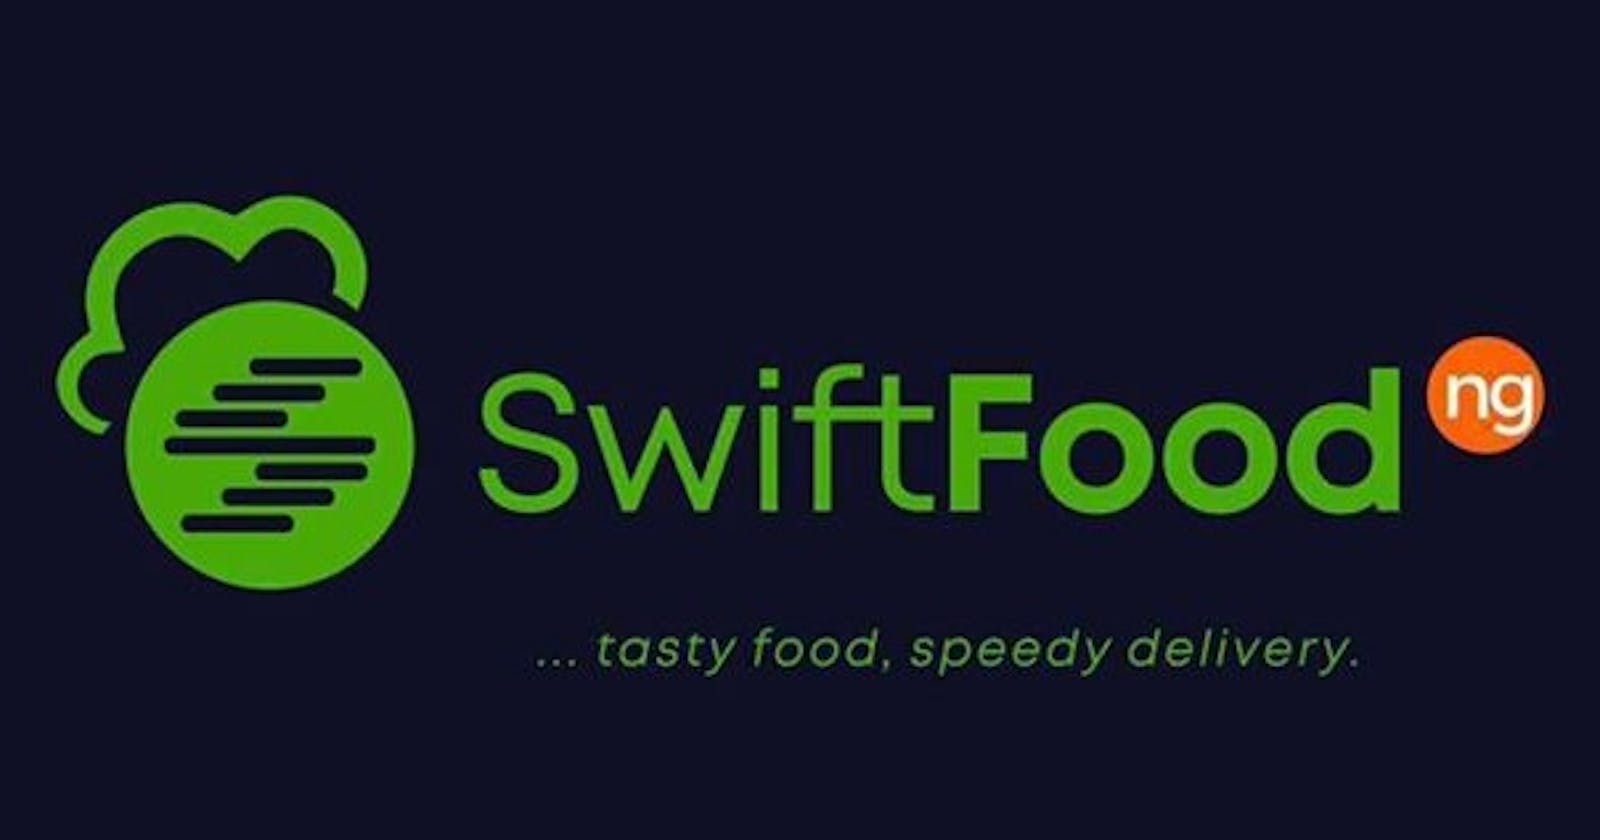 Swift foods:  the journey continues.